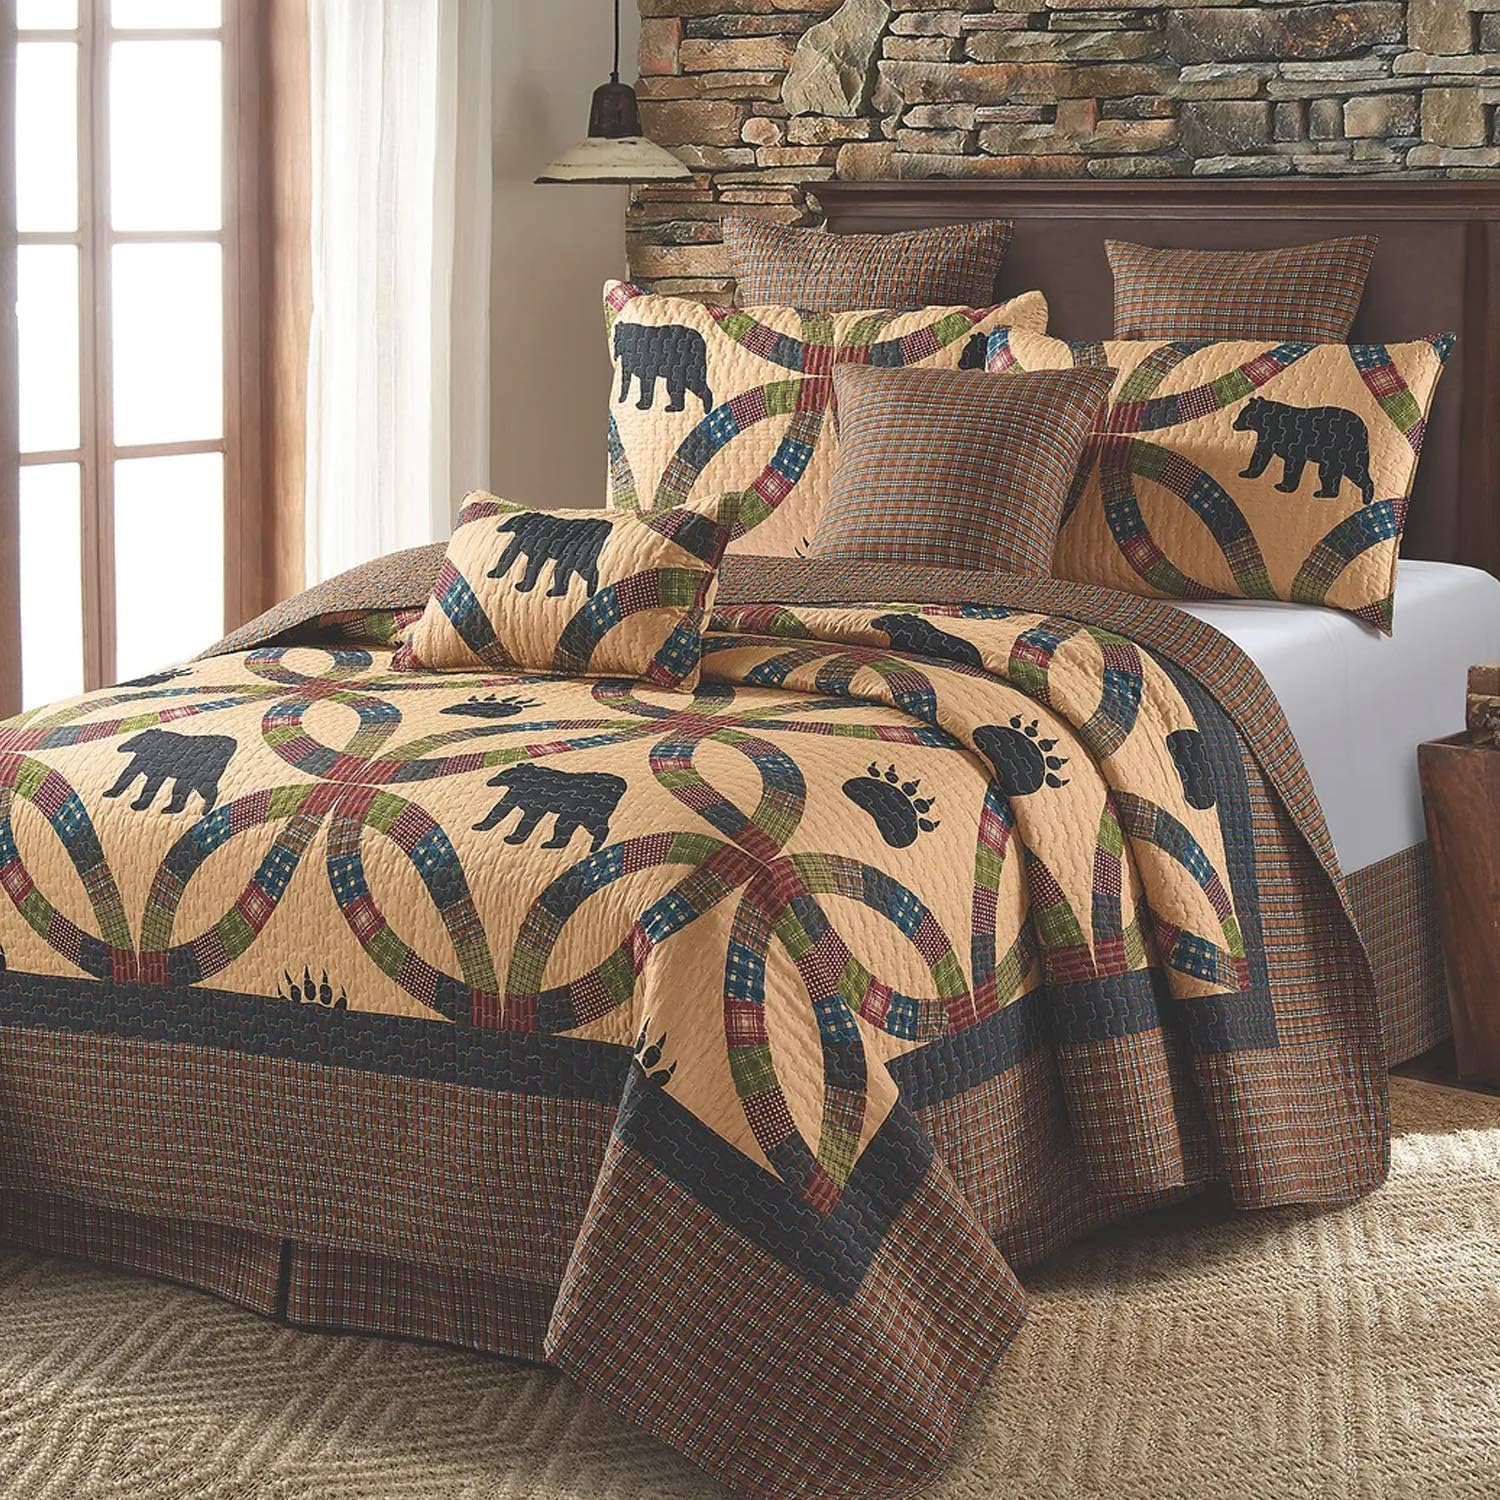 Virah Bella 3 Piece Queen Lodge Quilt Bedding Set - Wedding Ring Bear and Paw - Rustic Cabin Country Reversible Camping Comforter Set with Decorative Pillow Shams, Brown/Khaki